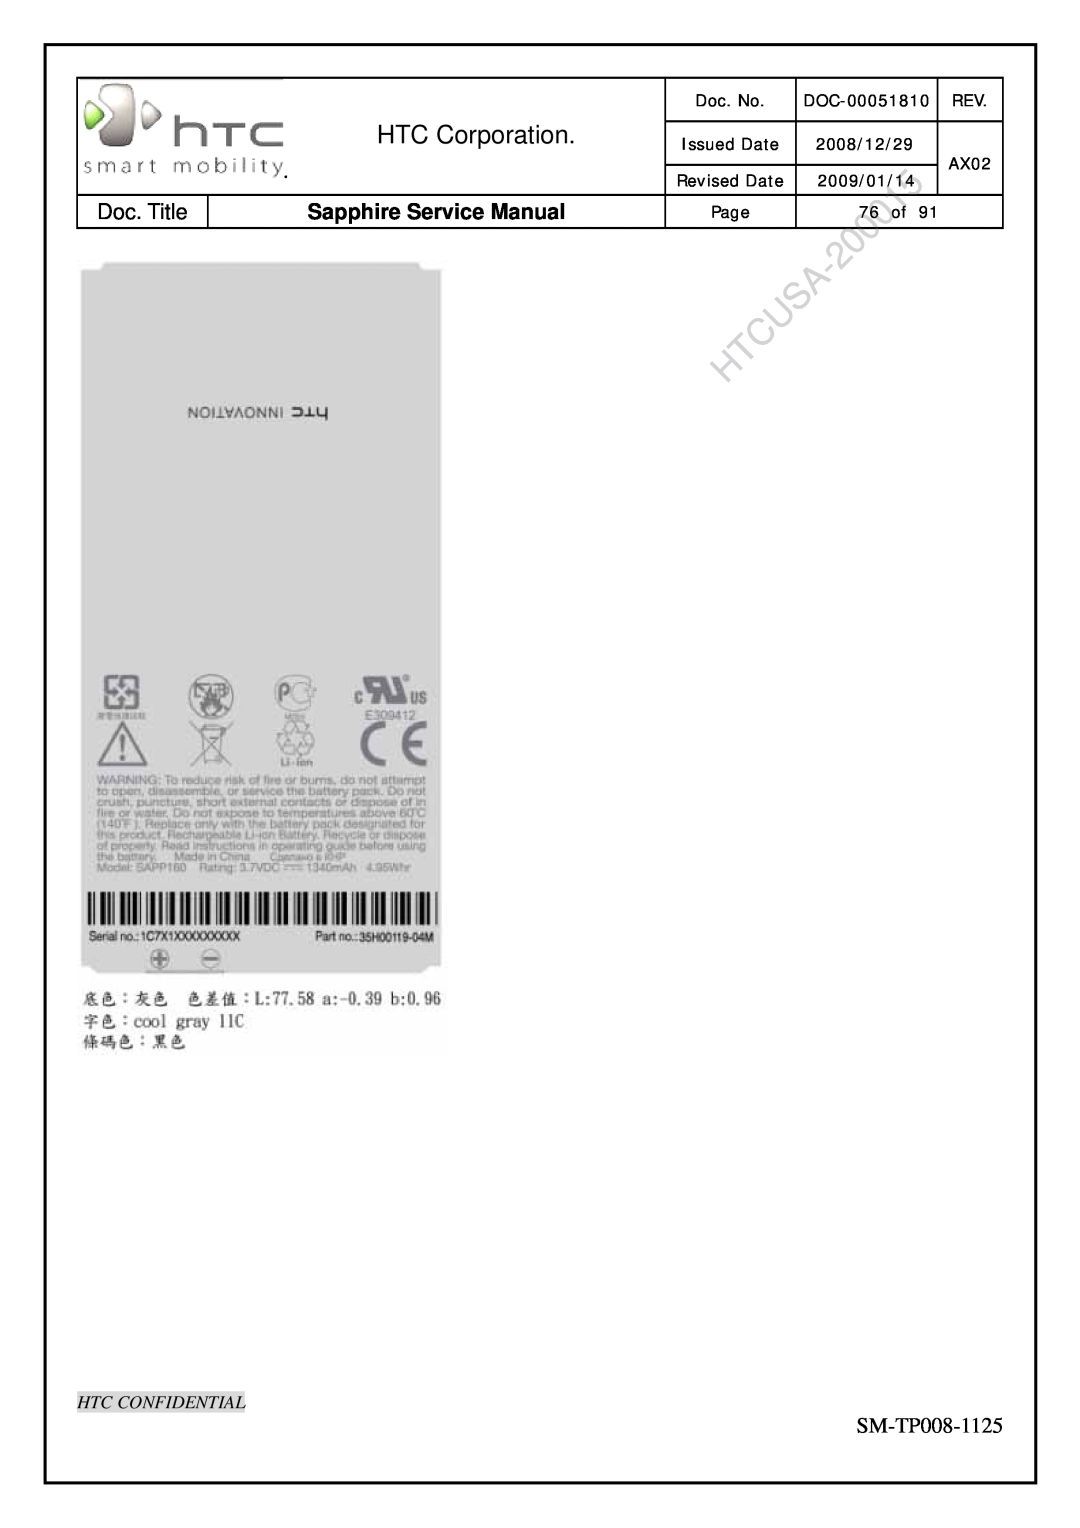 HTC SM-TP008-1125 HTC Corporation, Sapphire Service Manual, Htc Confidential, Doc. No, DOC-00051810, 76 of, Issued Date 